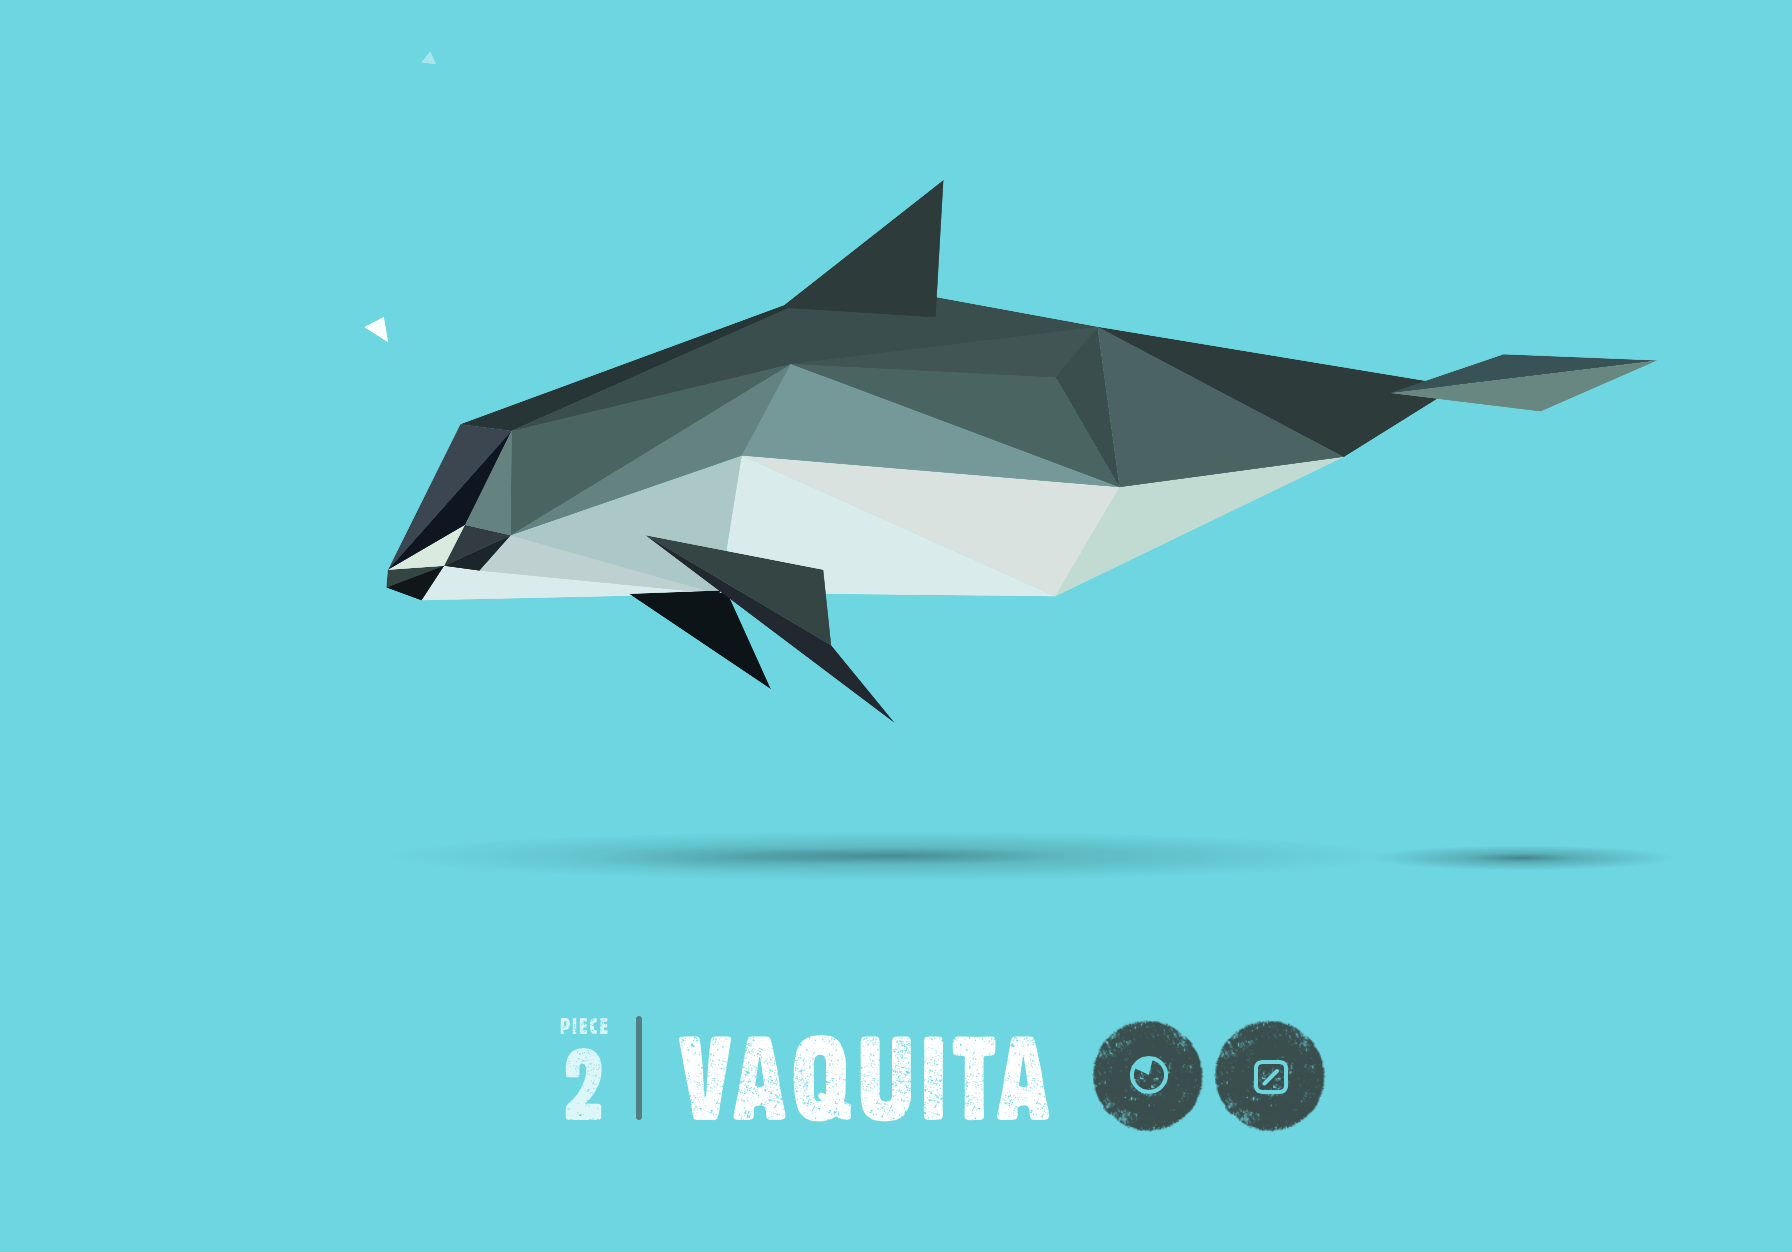 Endangered species depicted with geometric pieces | FlowingData